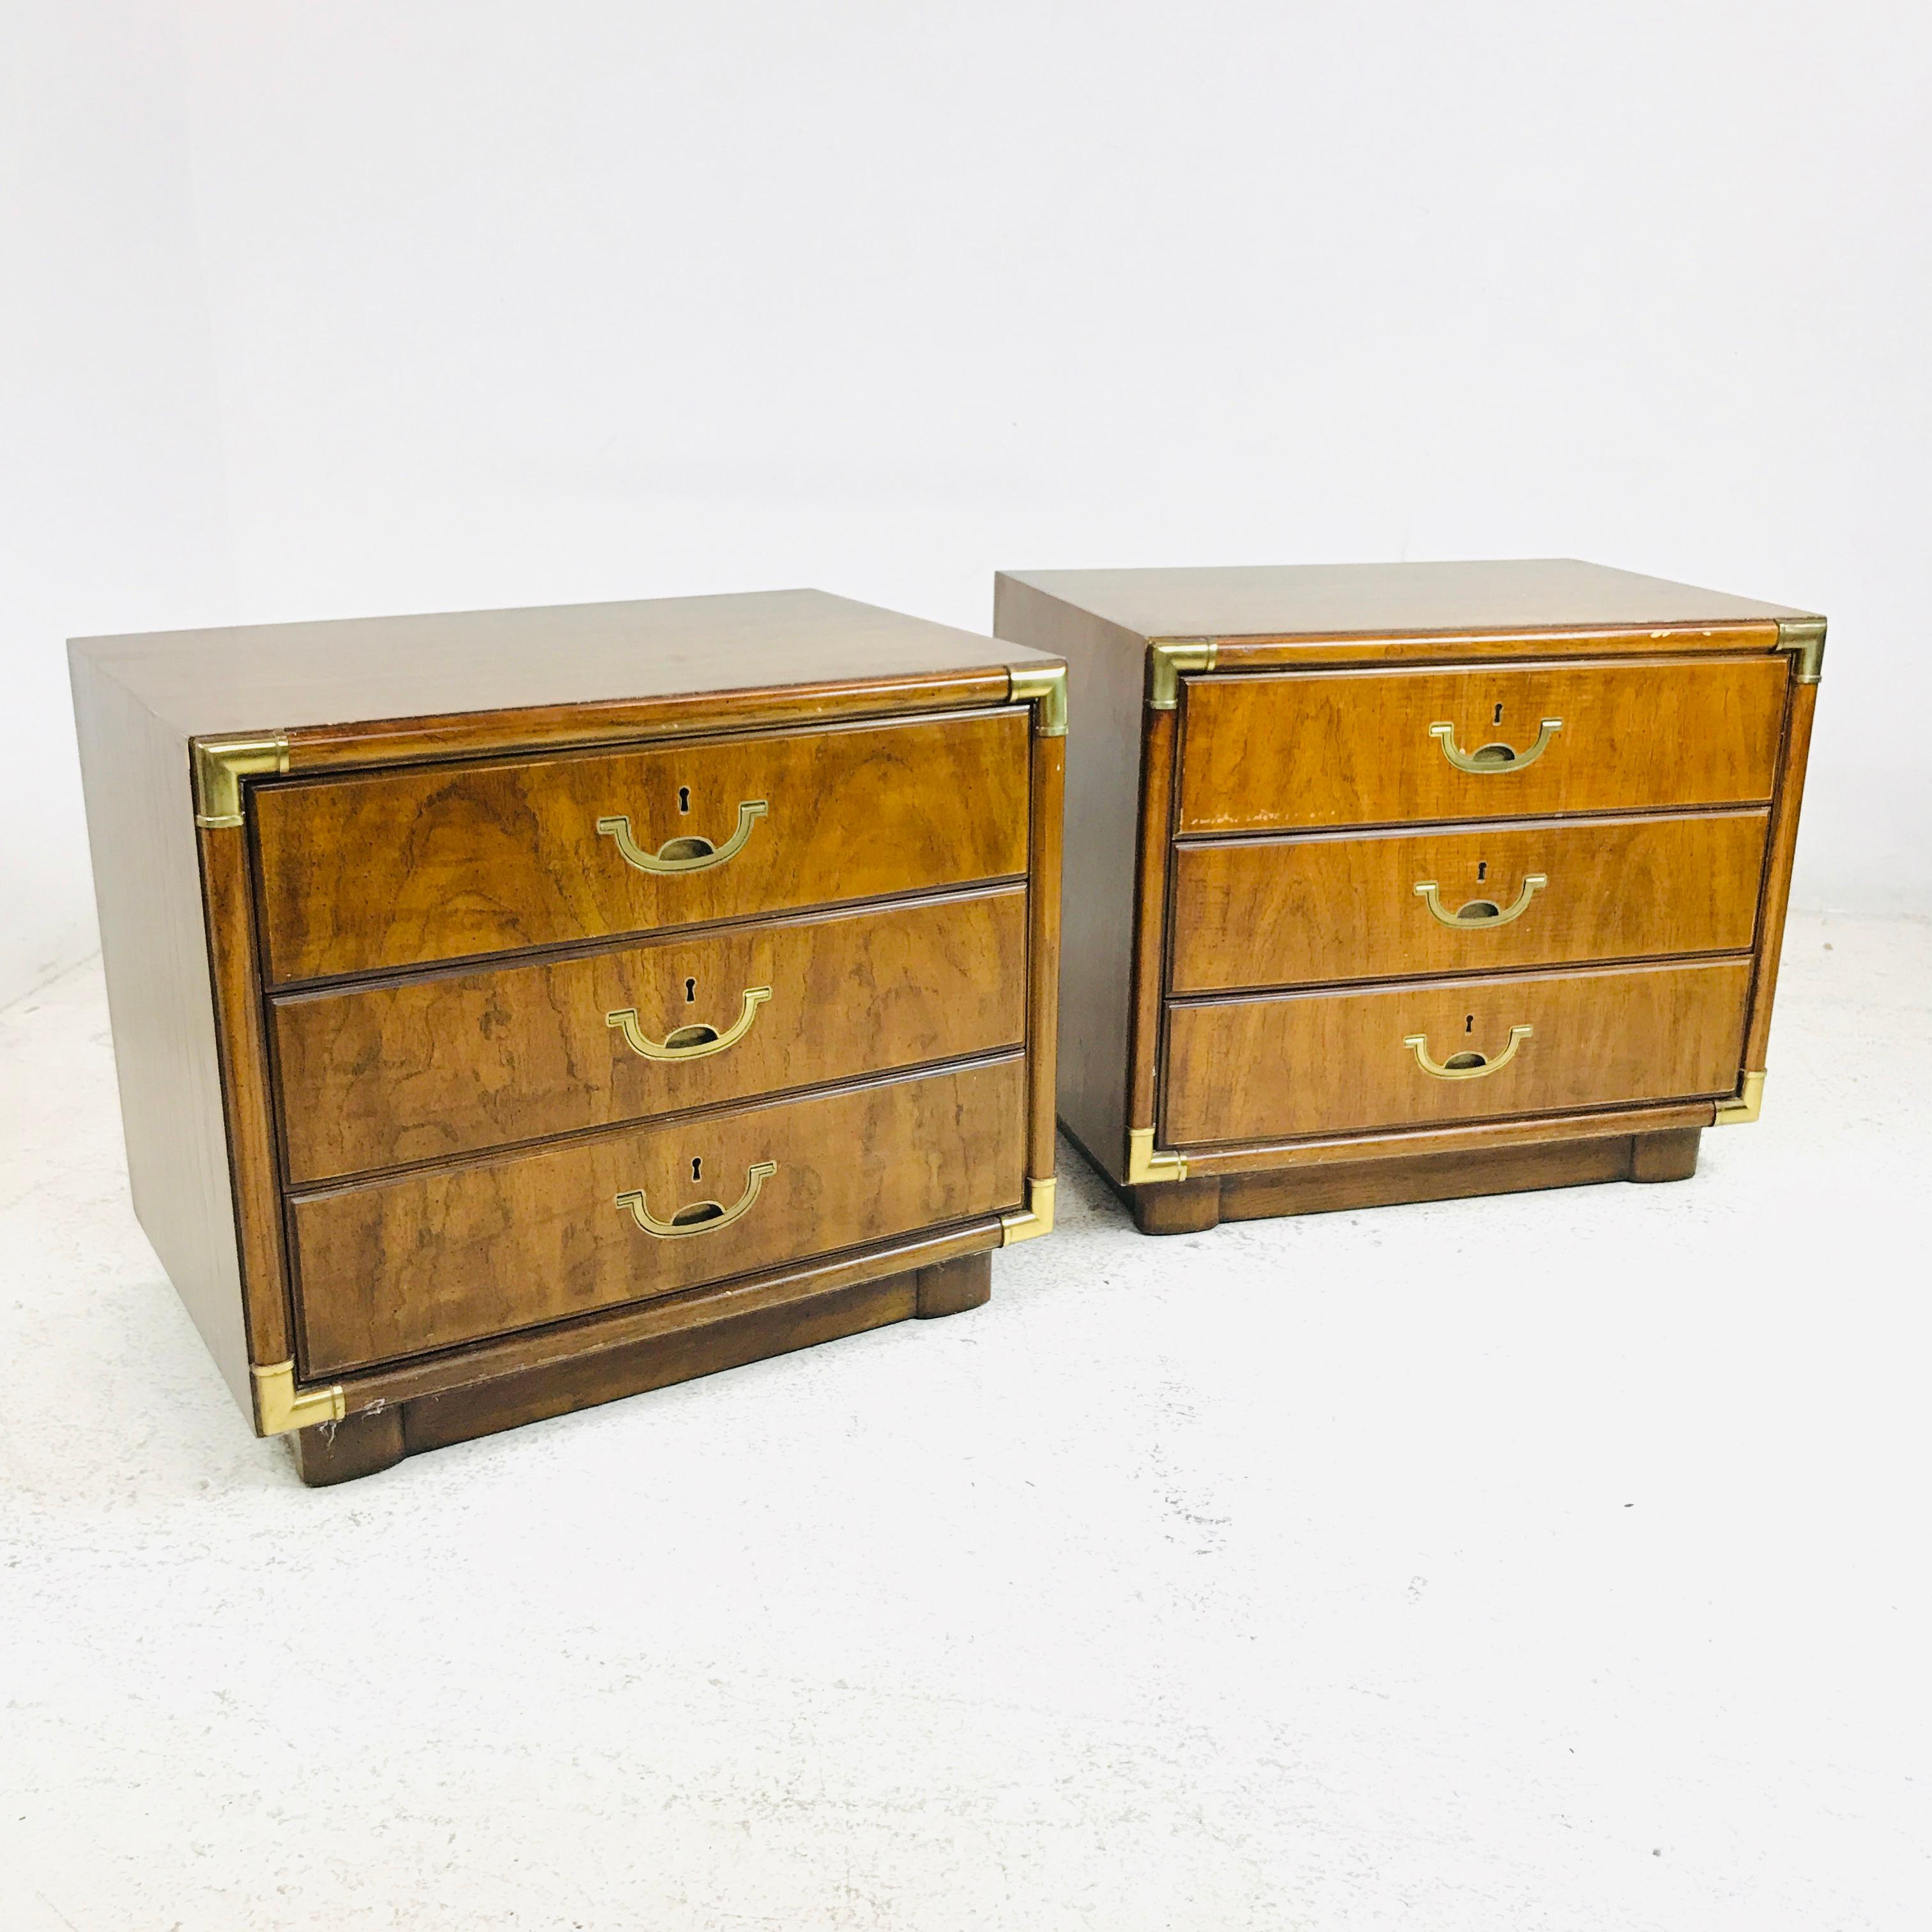 Pair of 1970s campaign style nightstands by Drexel. Original brass hardware.